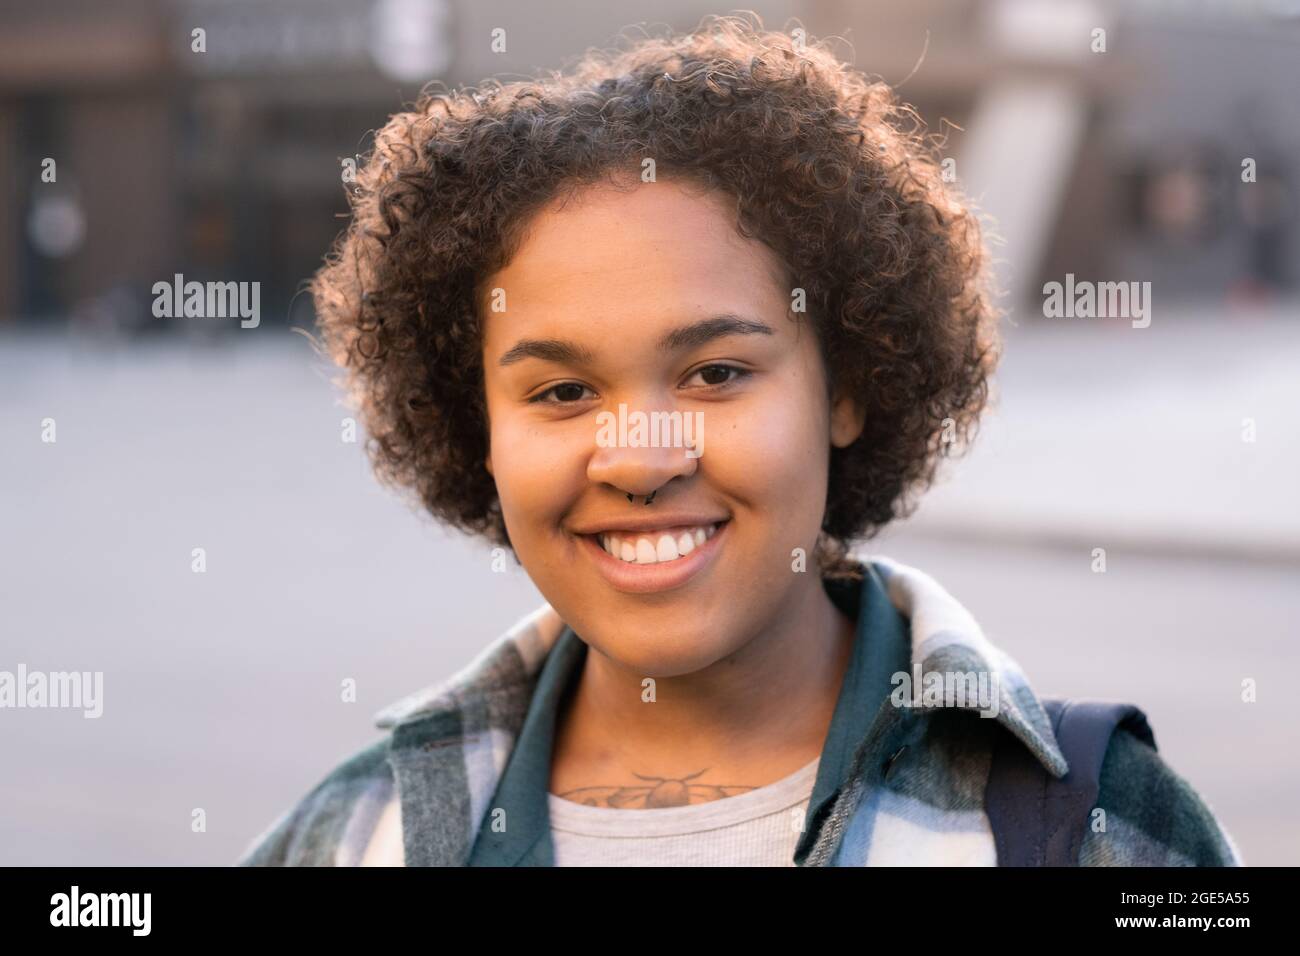 Happy girl of African ethnicity standing in front of camera in urban environment Stock Photo